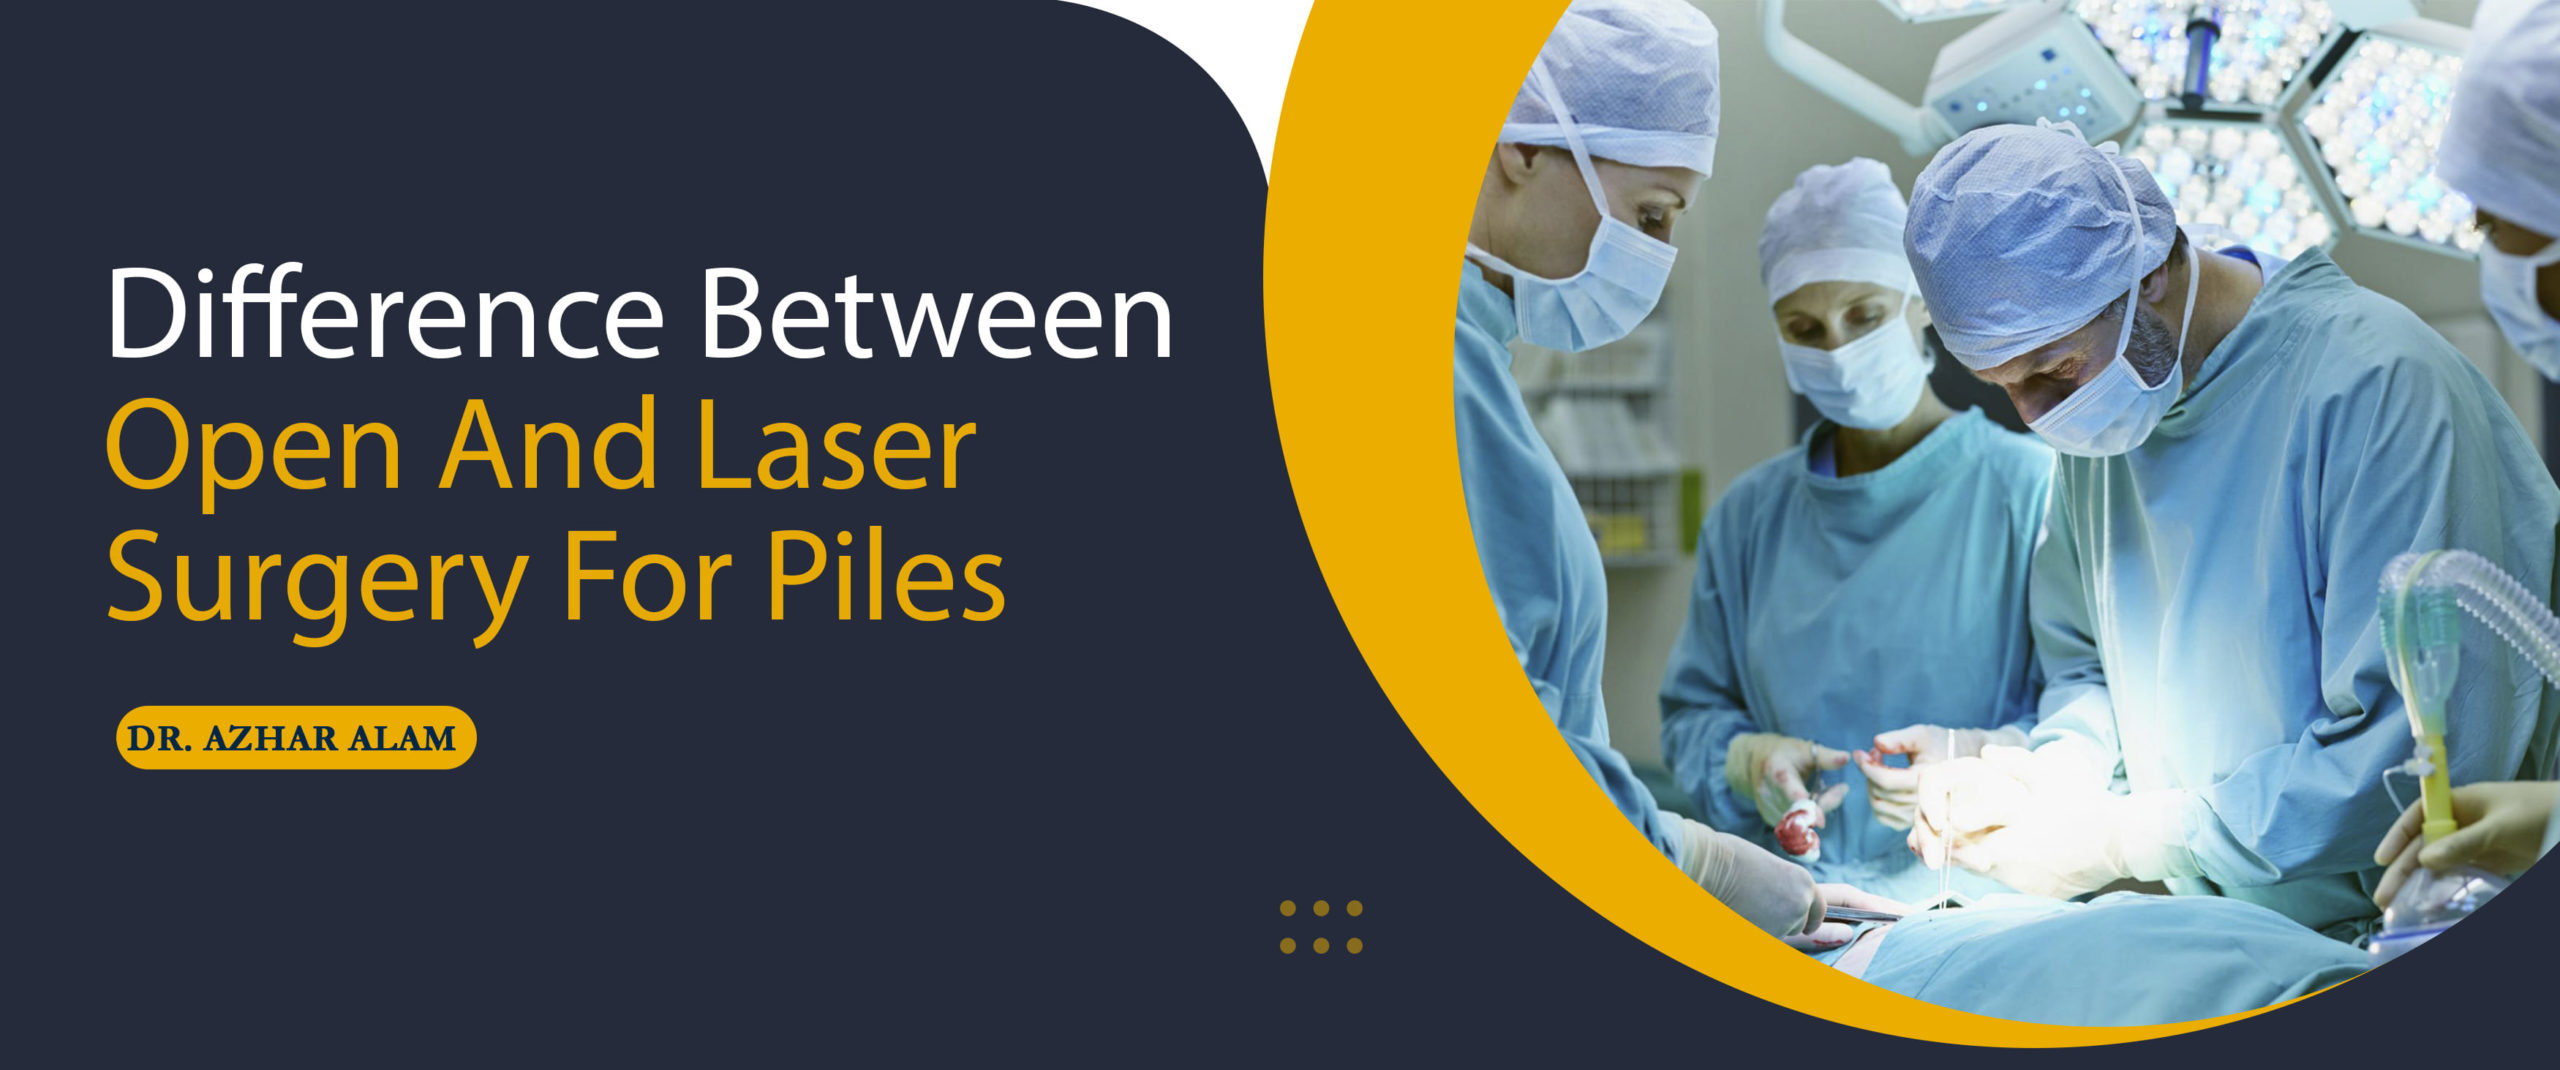 Difference Between Open And Laser Surgery For Piles